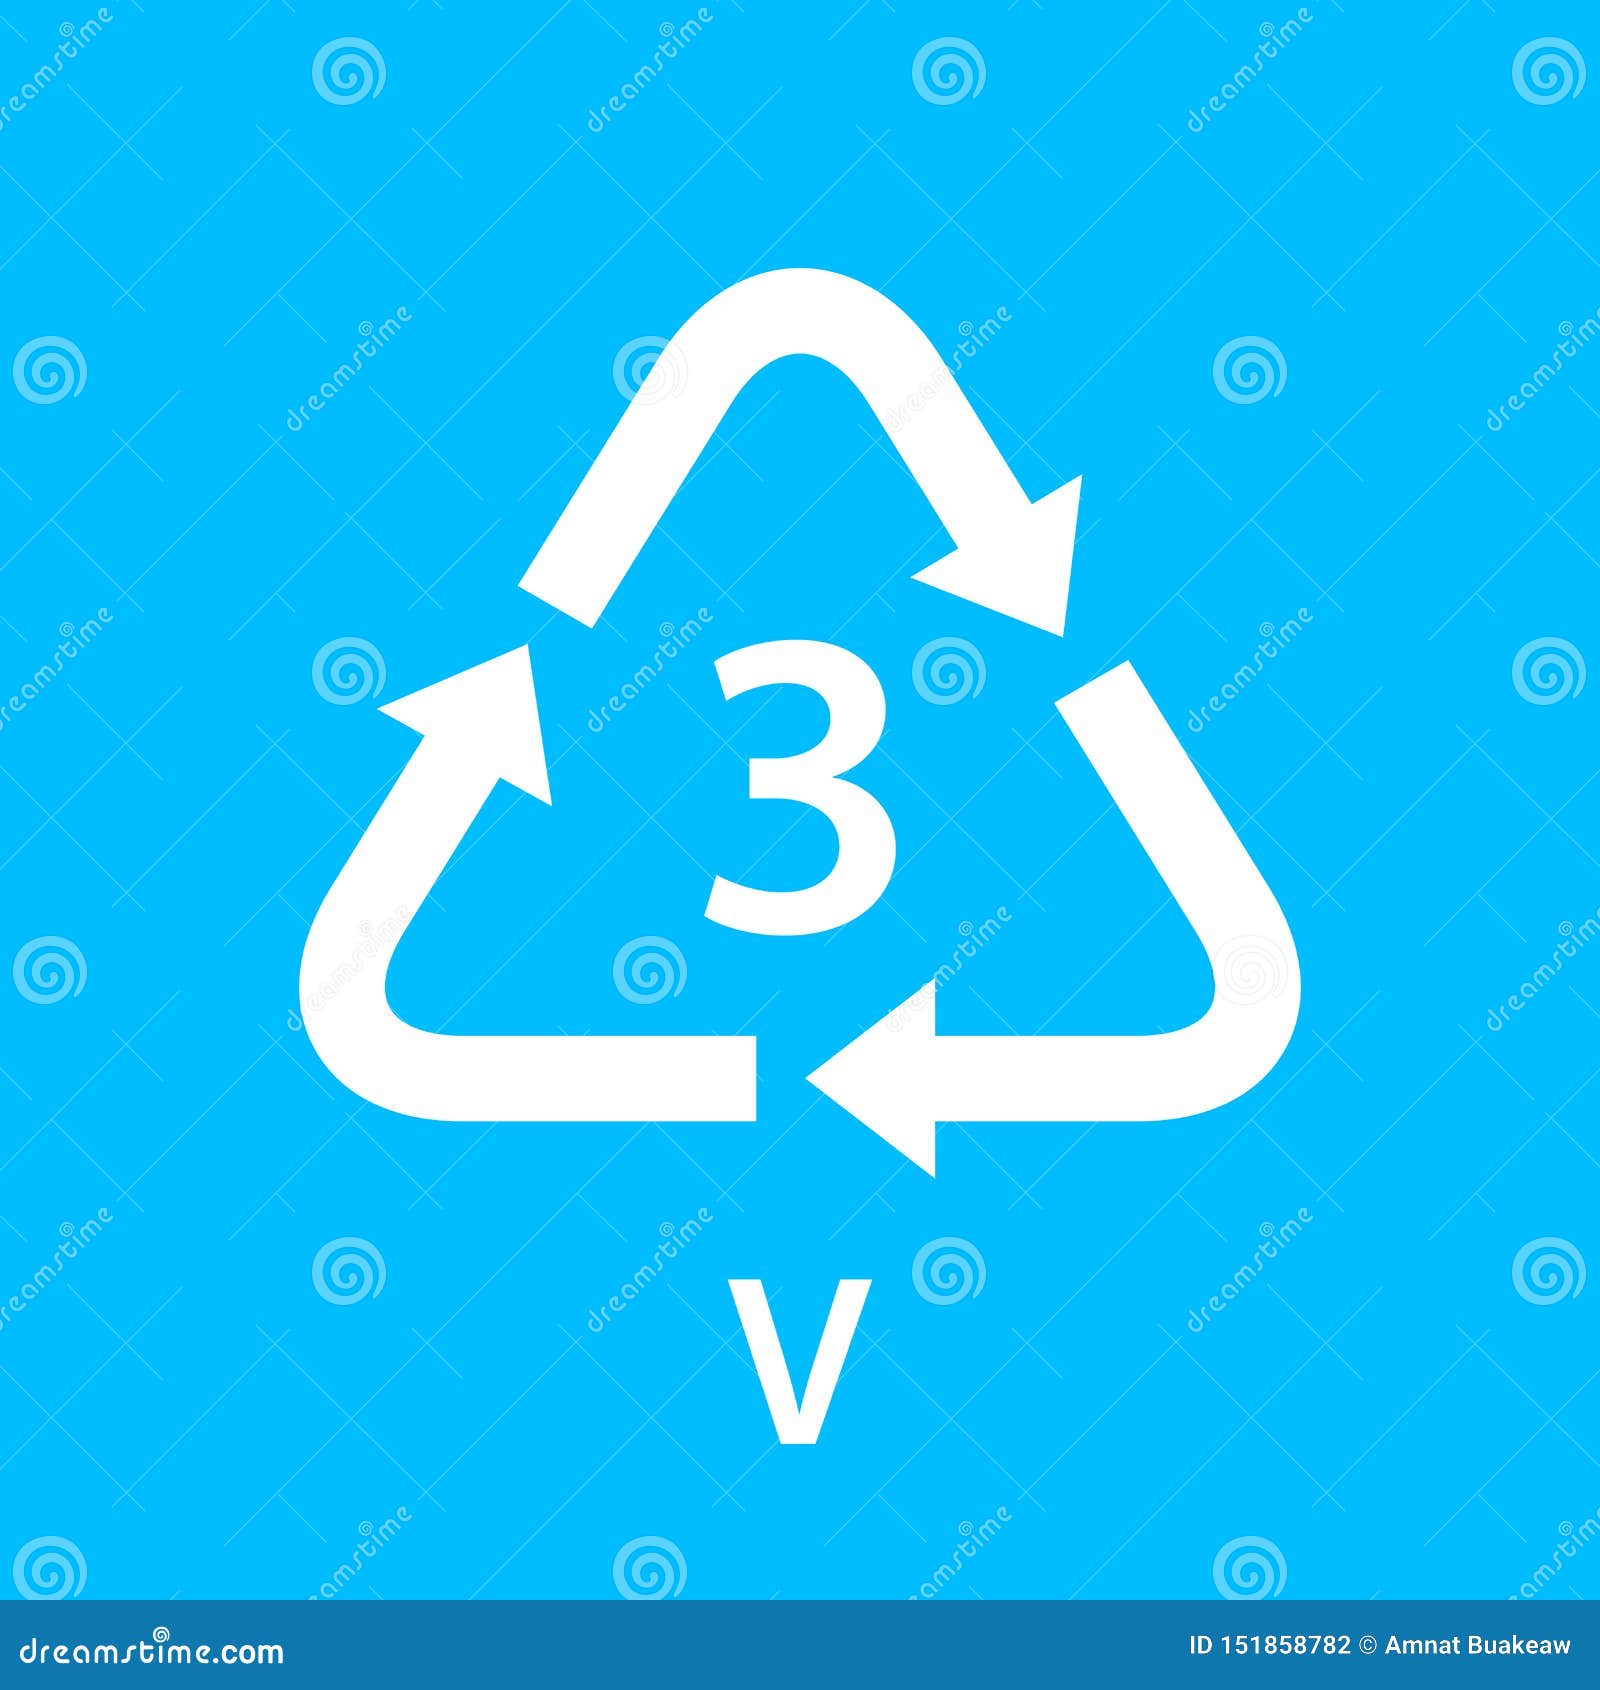 recycle arrow triangle v types 3  on blue background, ogy three type logo of plastic v materials, recycle triangle